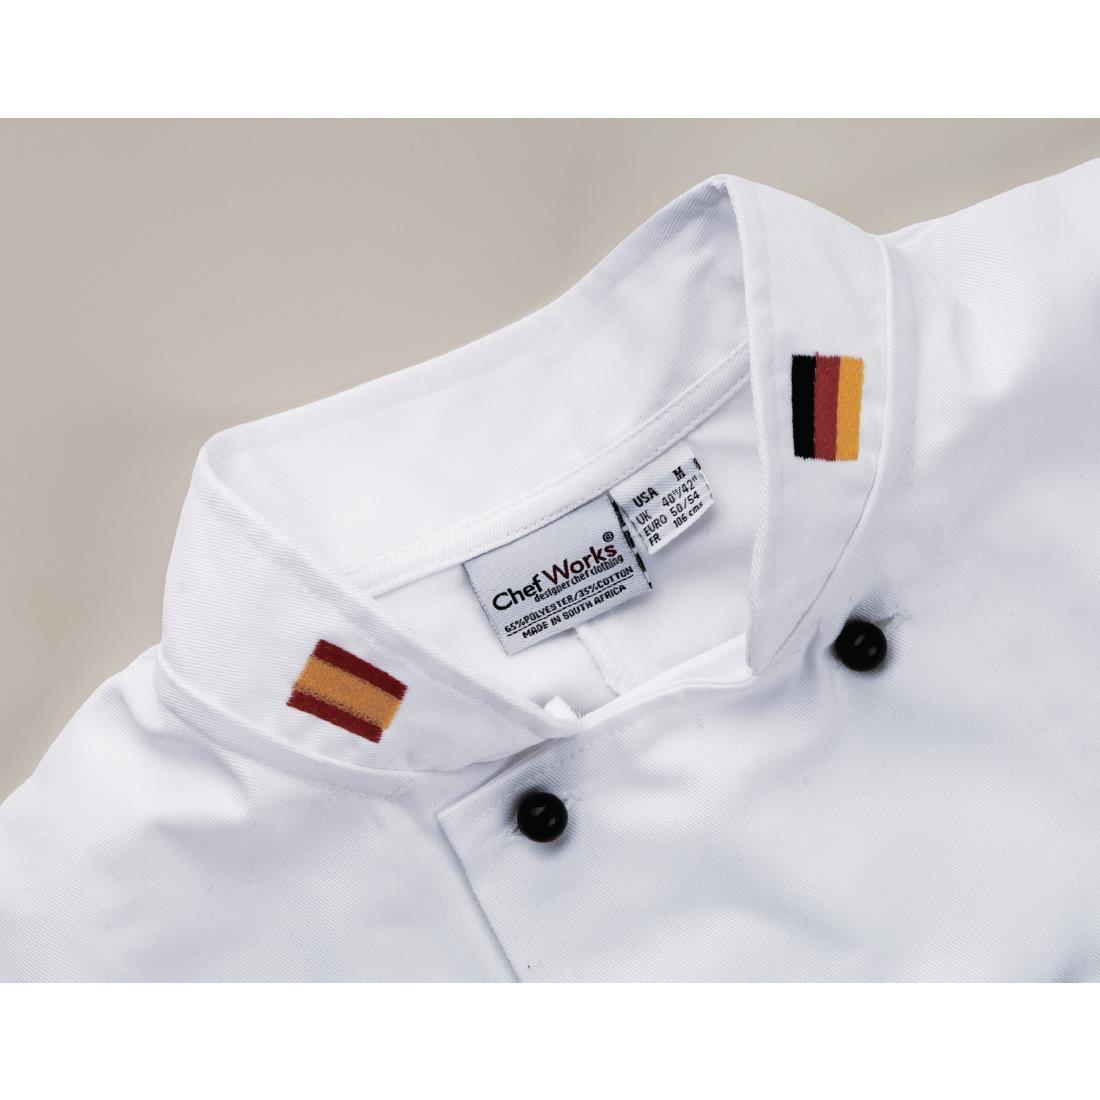 Embroidery Collar Flags - A987-AT  - 1